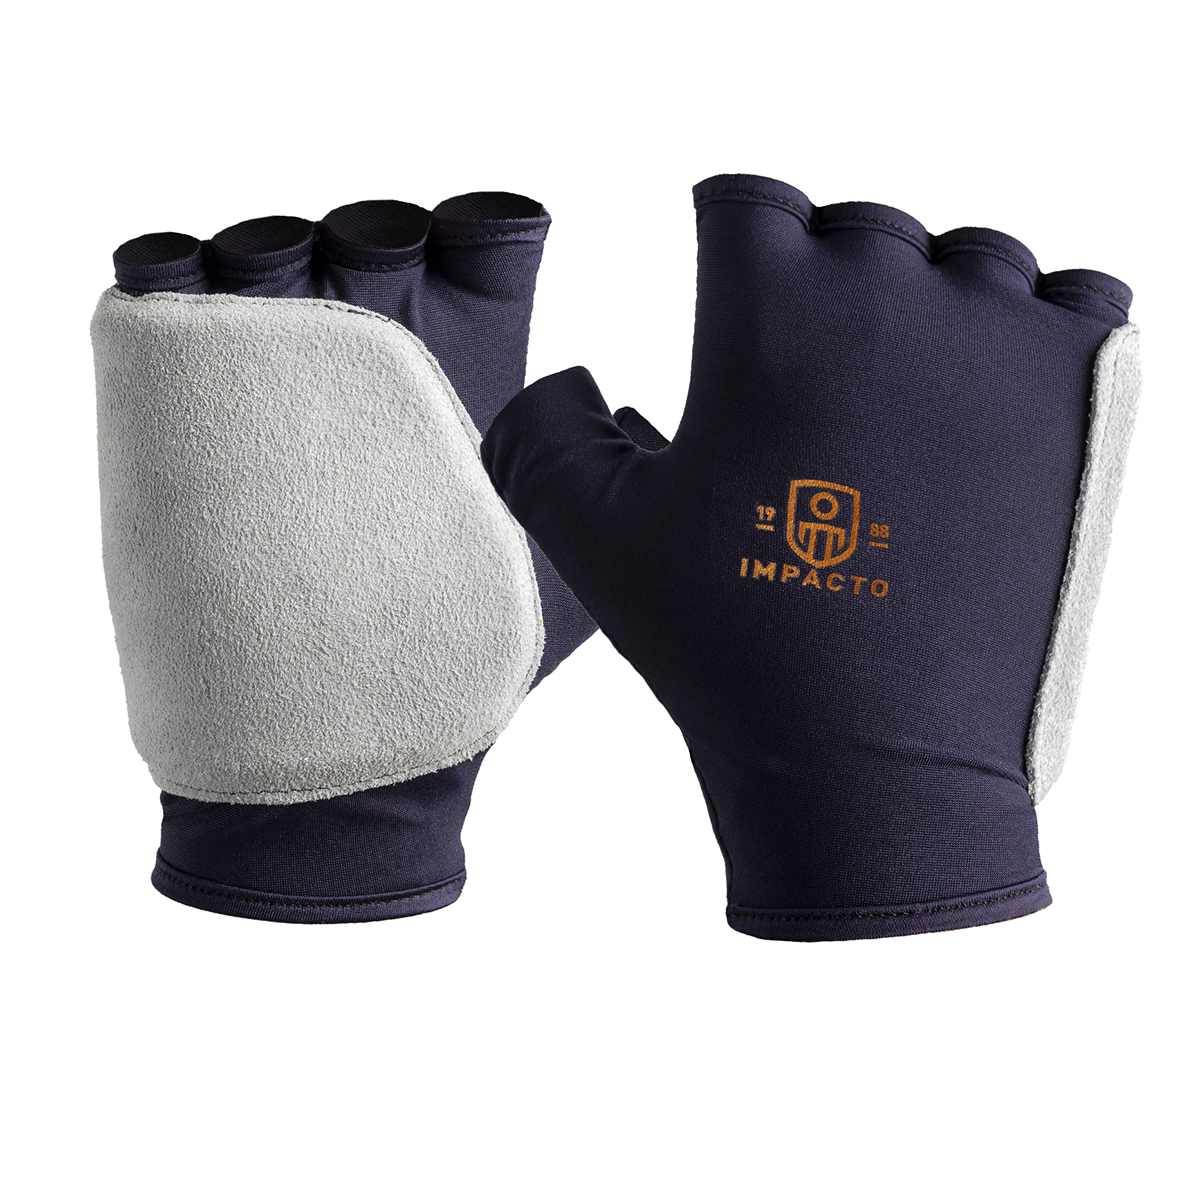 IMPACTO 523-14SLH GLOVE IMPACT 1/4 SUEDE SIDE